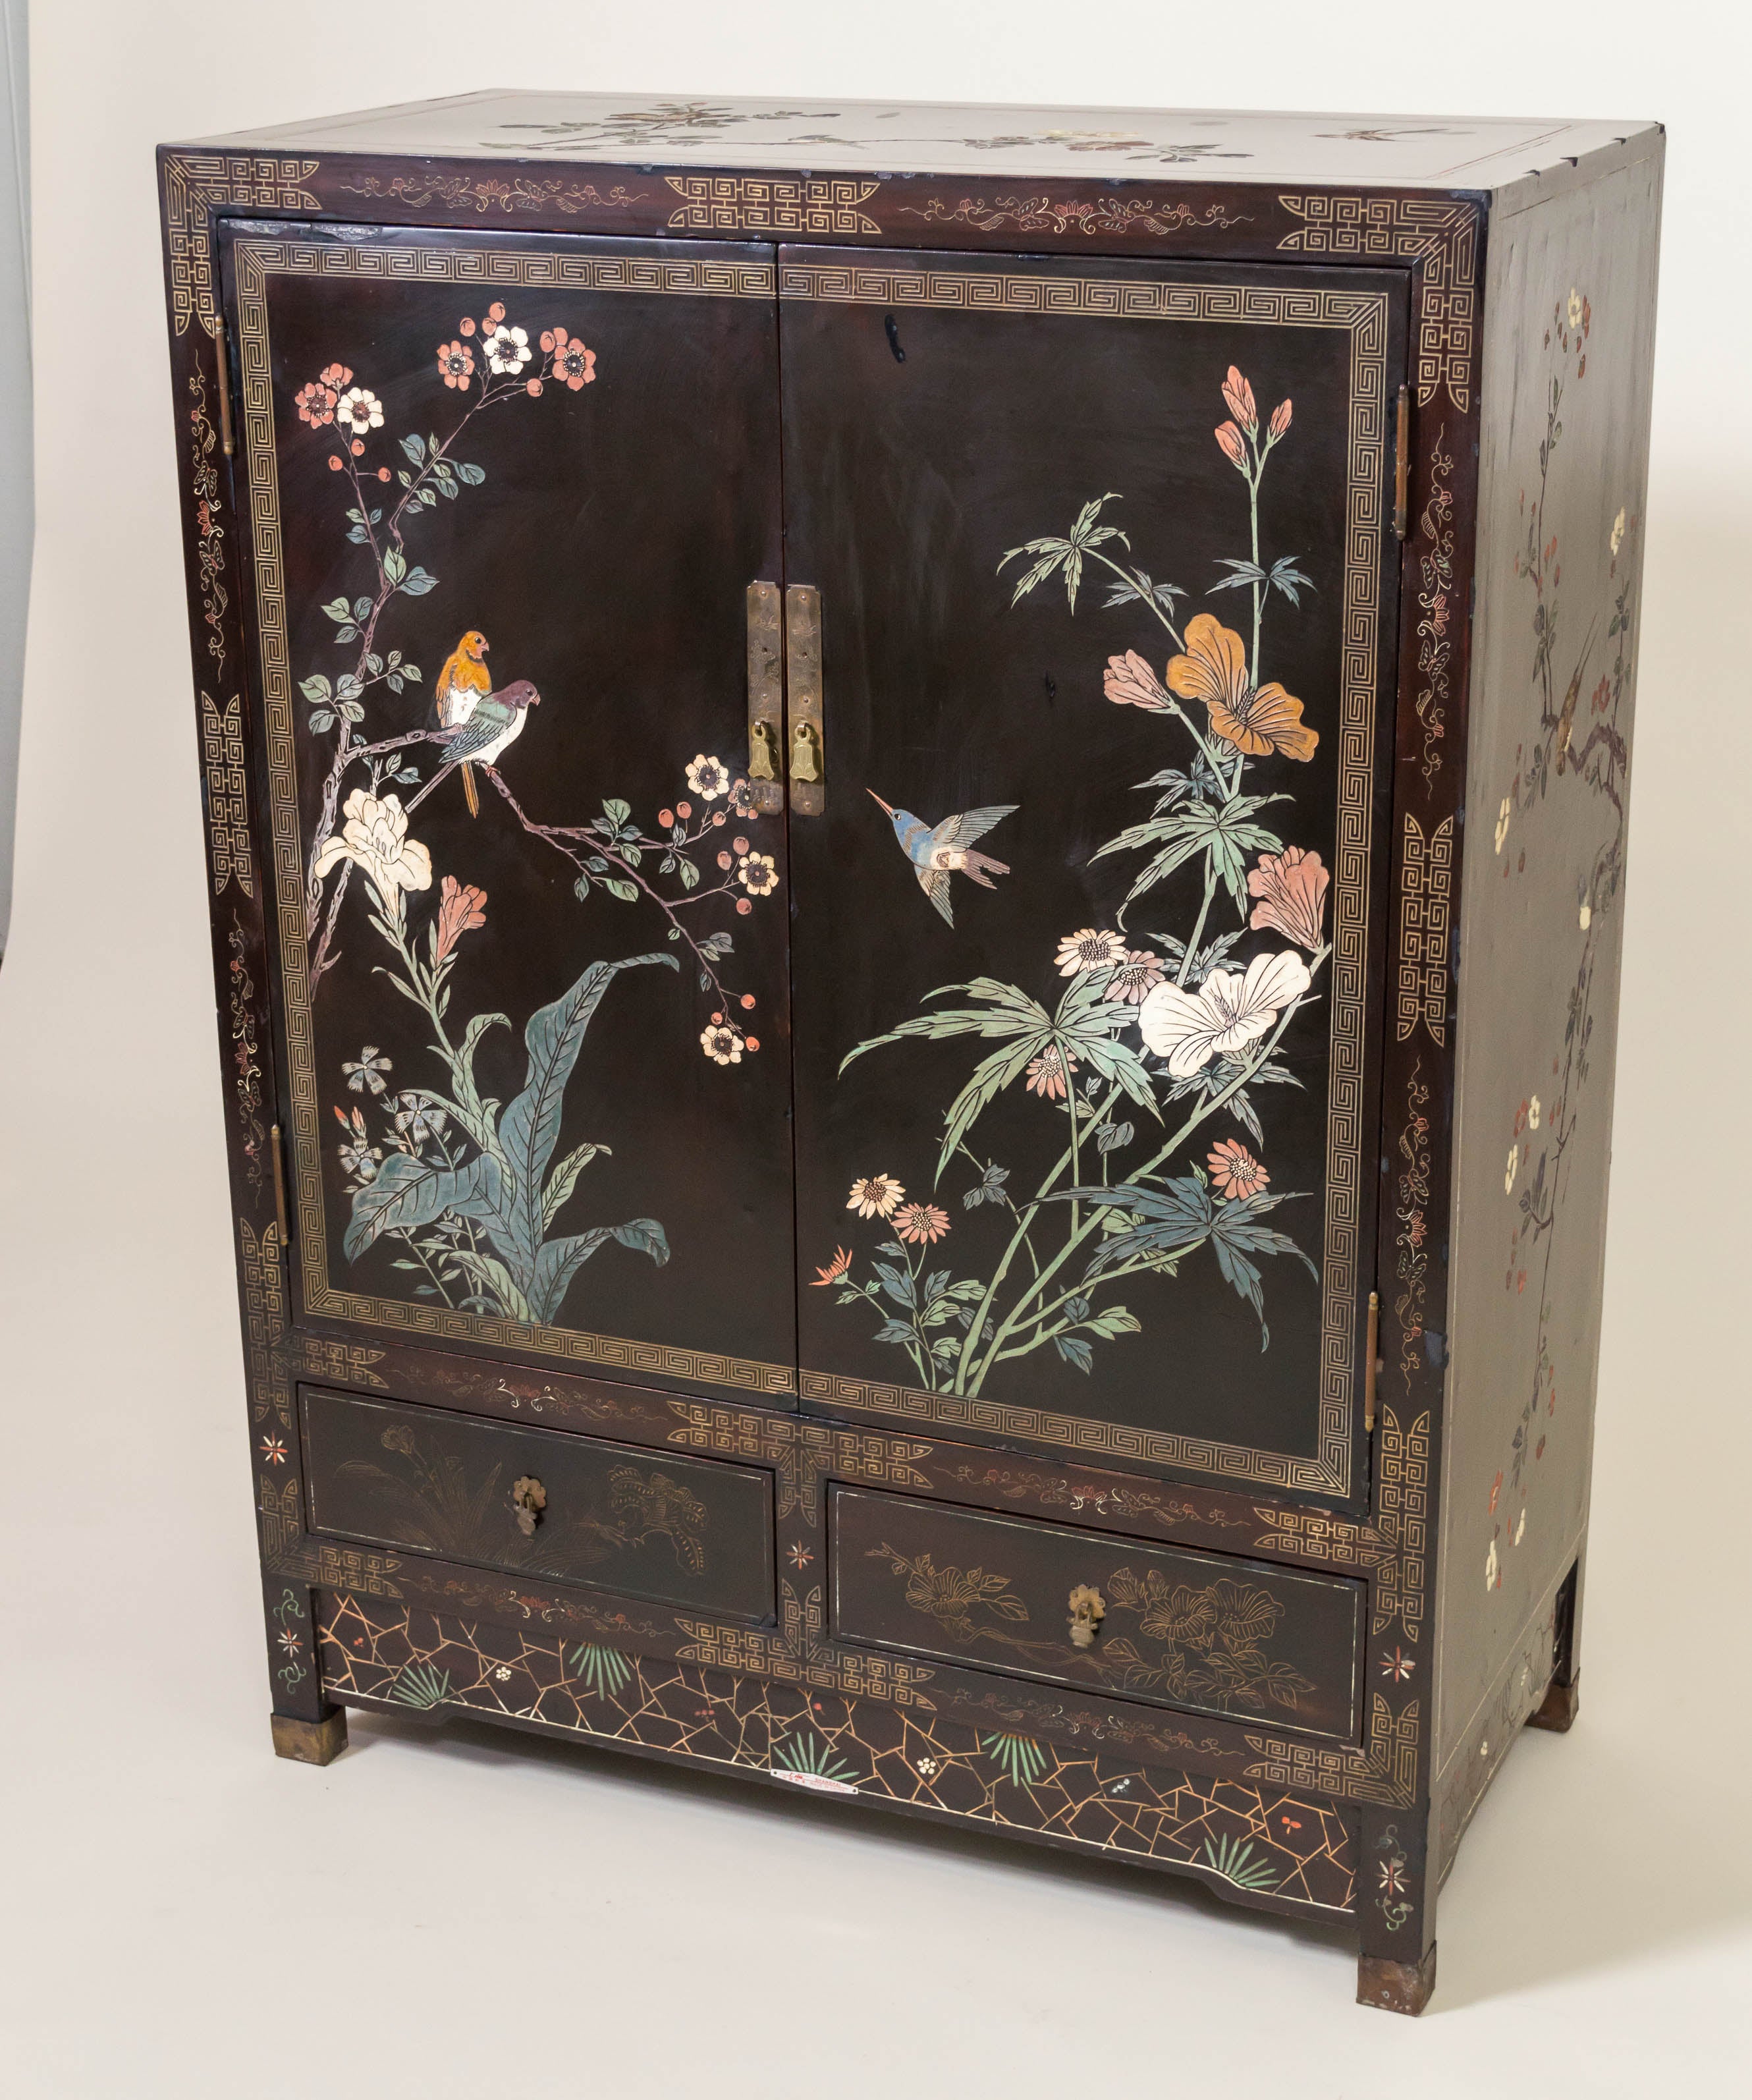 Chinese Coromandel and Lacquer Cabinet, Shanghai, China